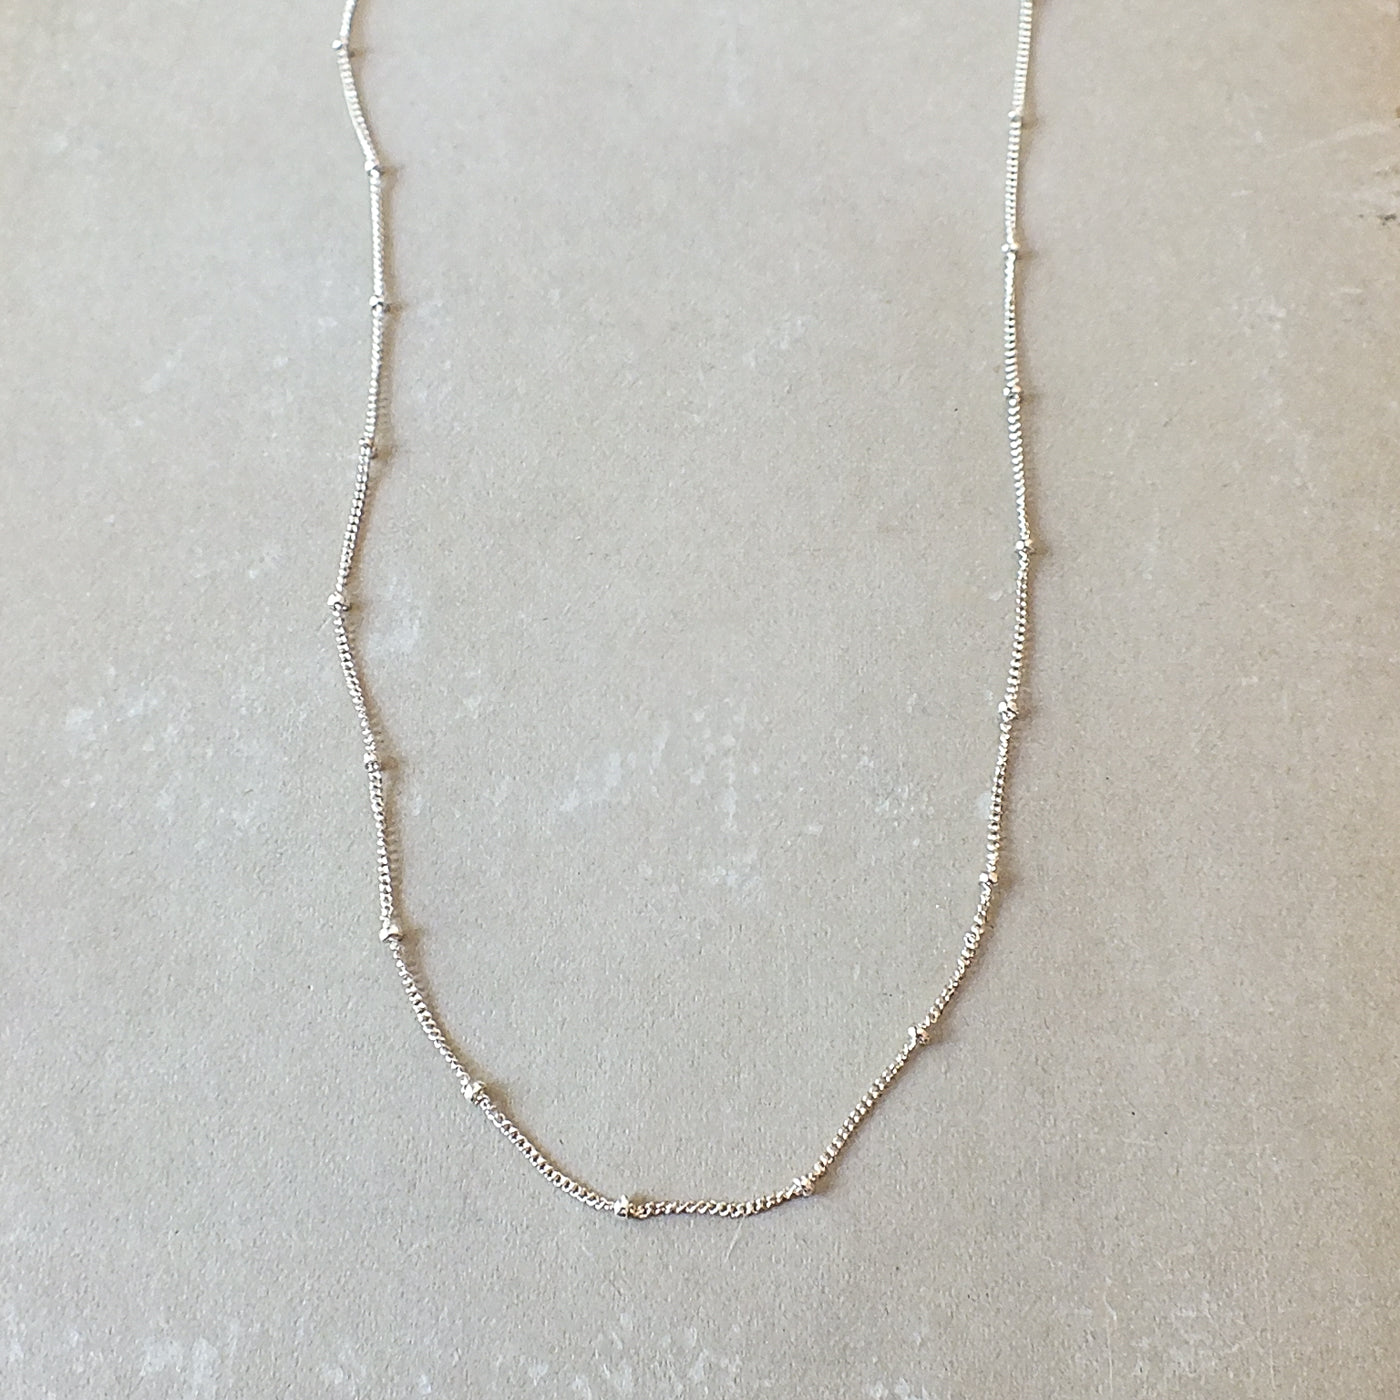 Becoming Jewelry&#39;s sterling silver Satellite Chain Necklace is featured on a gray background.